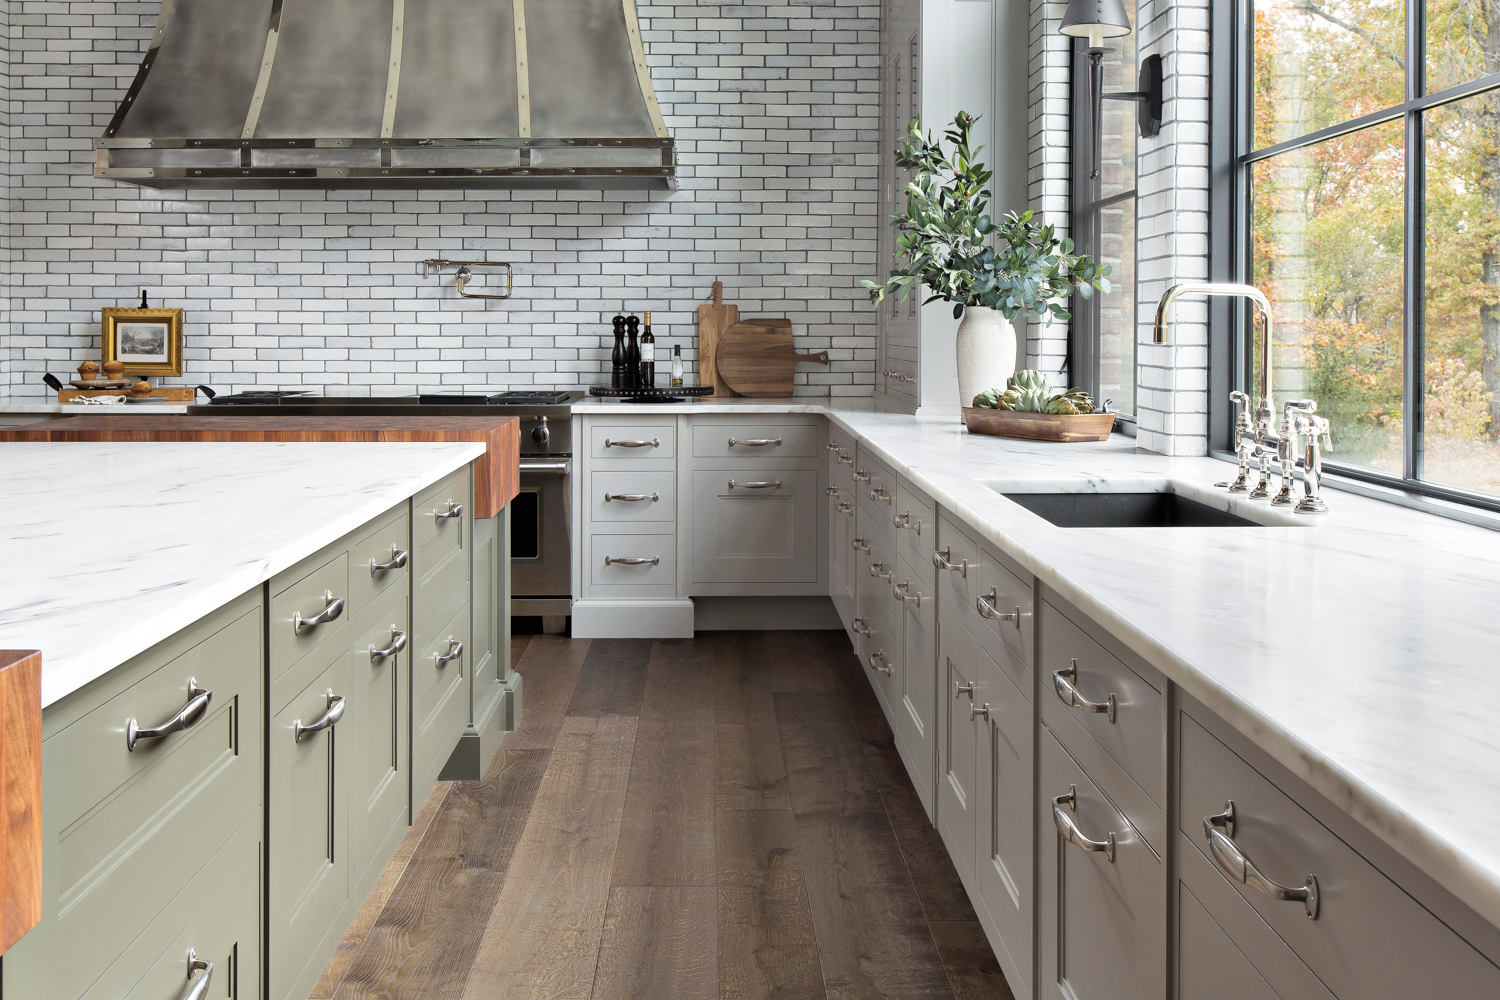 Behind The Calming Kitchen Scheme We’re All Craving Right Now